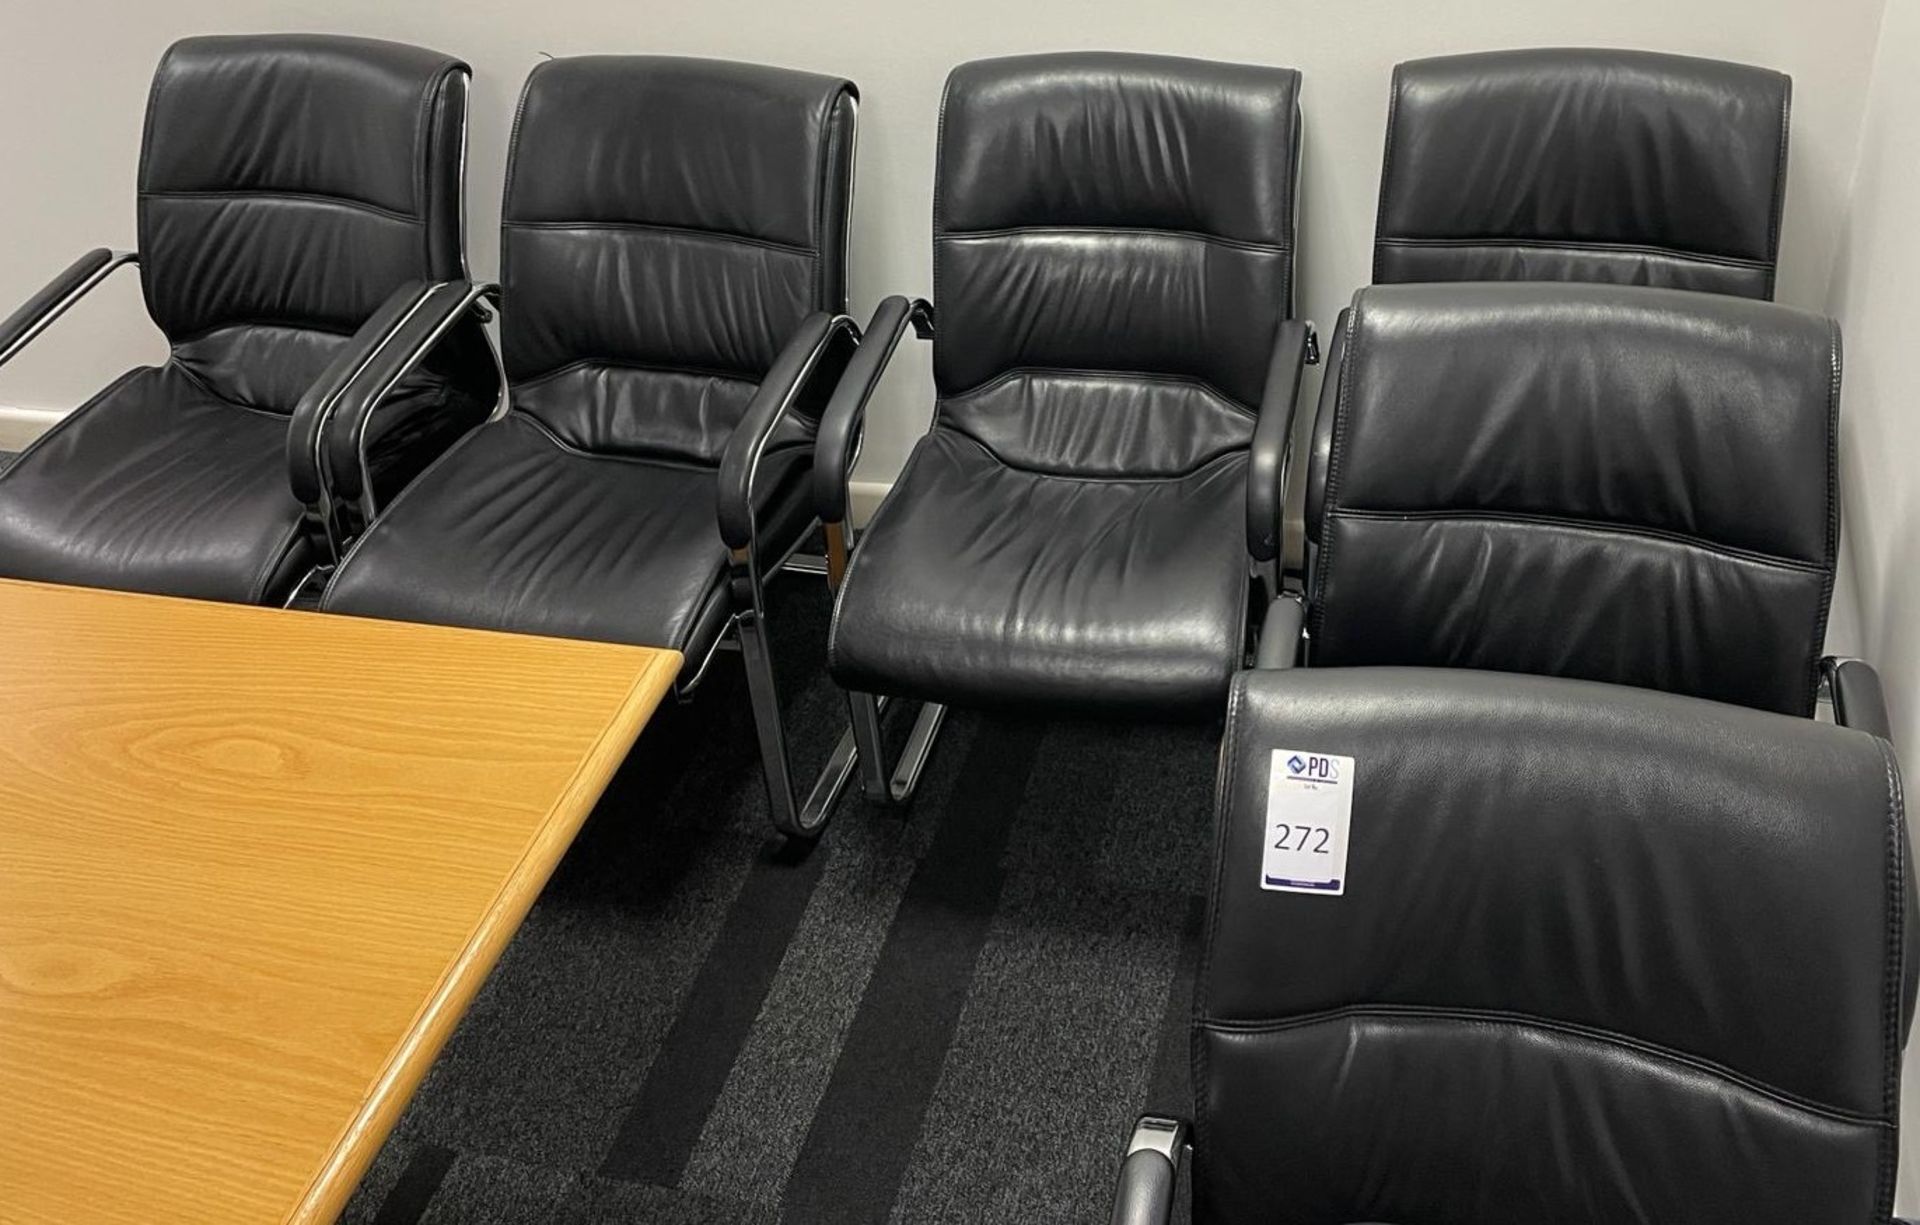 6 Leather Cantilever Chairs (Located Rugby. Please Refer to General Notes)